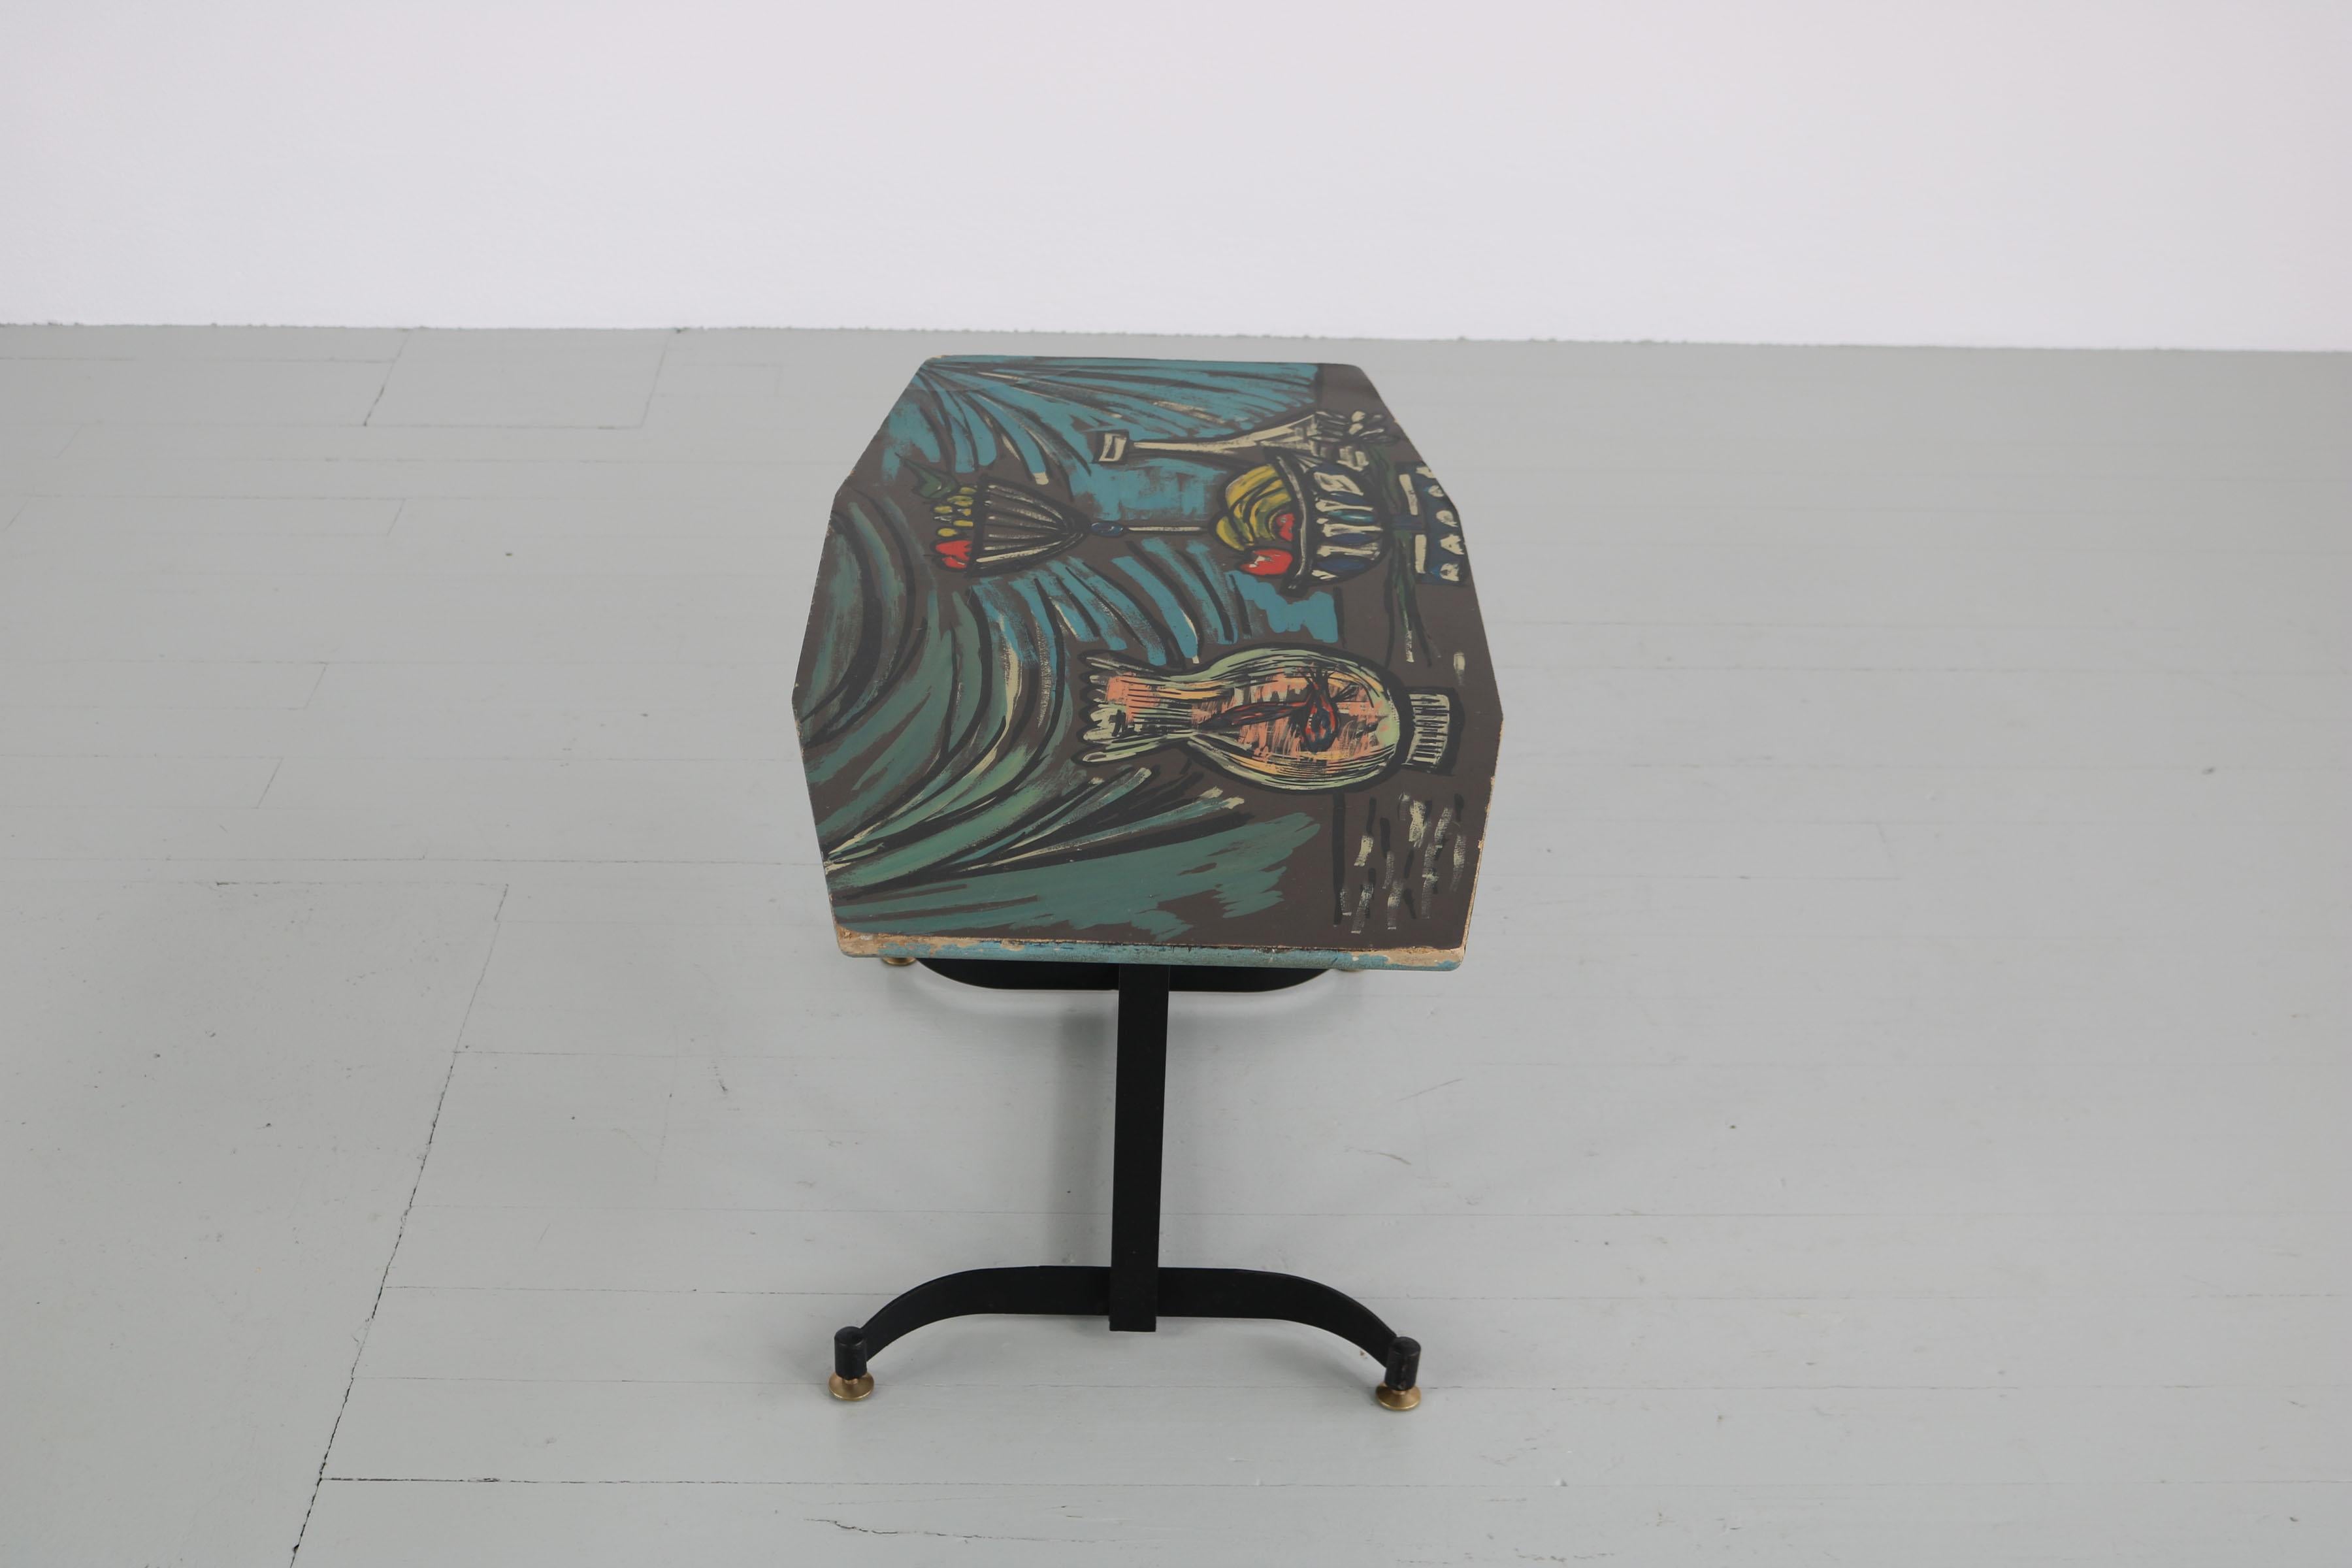 Italian Dark Sofa Table with Colorful Hand Painted Motives on Table Top, 1950s For Sale 9